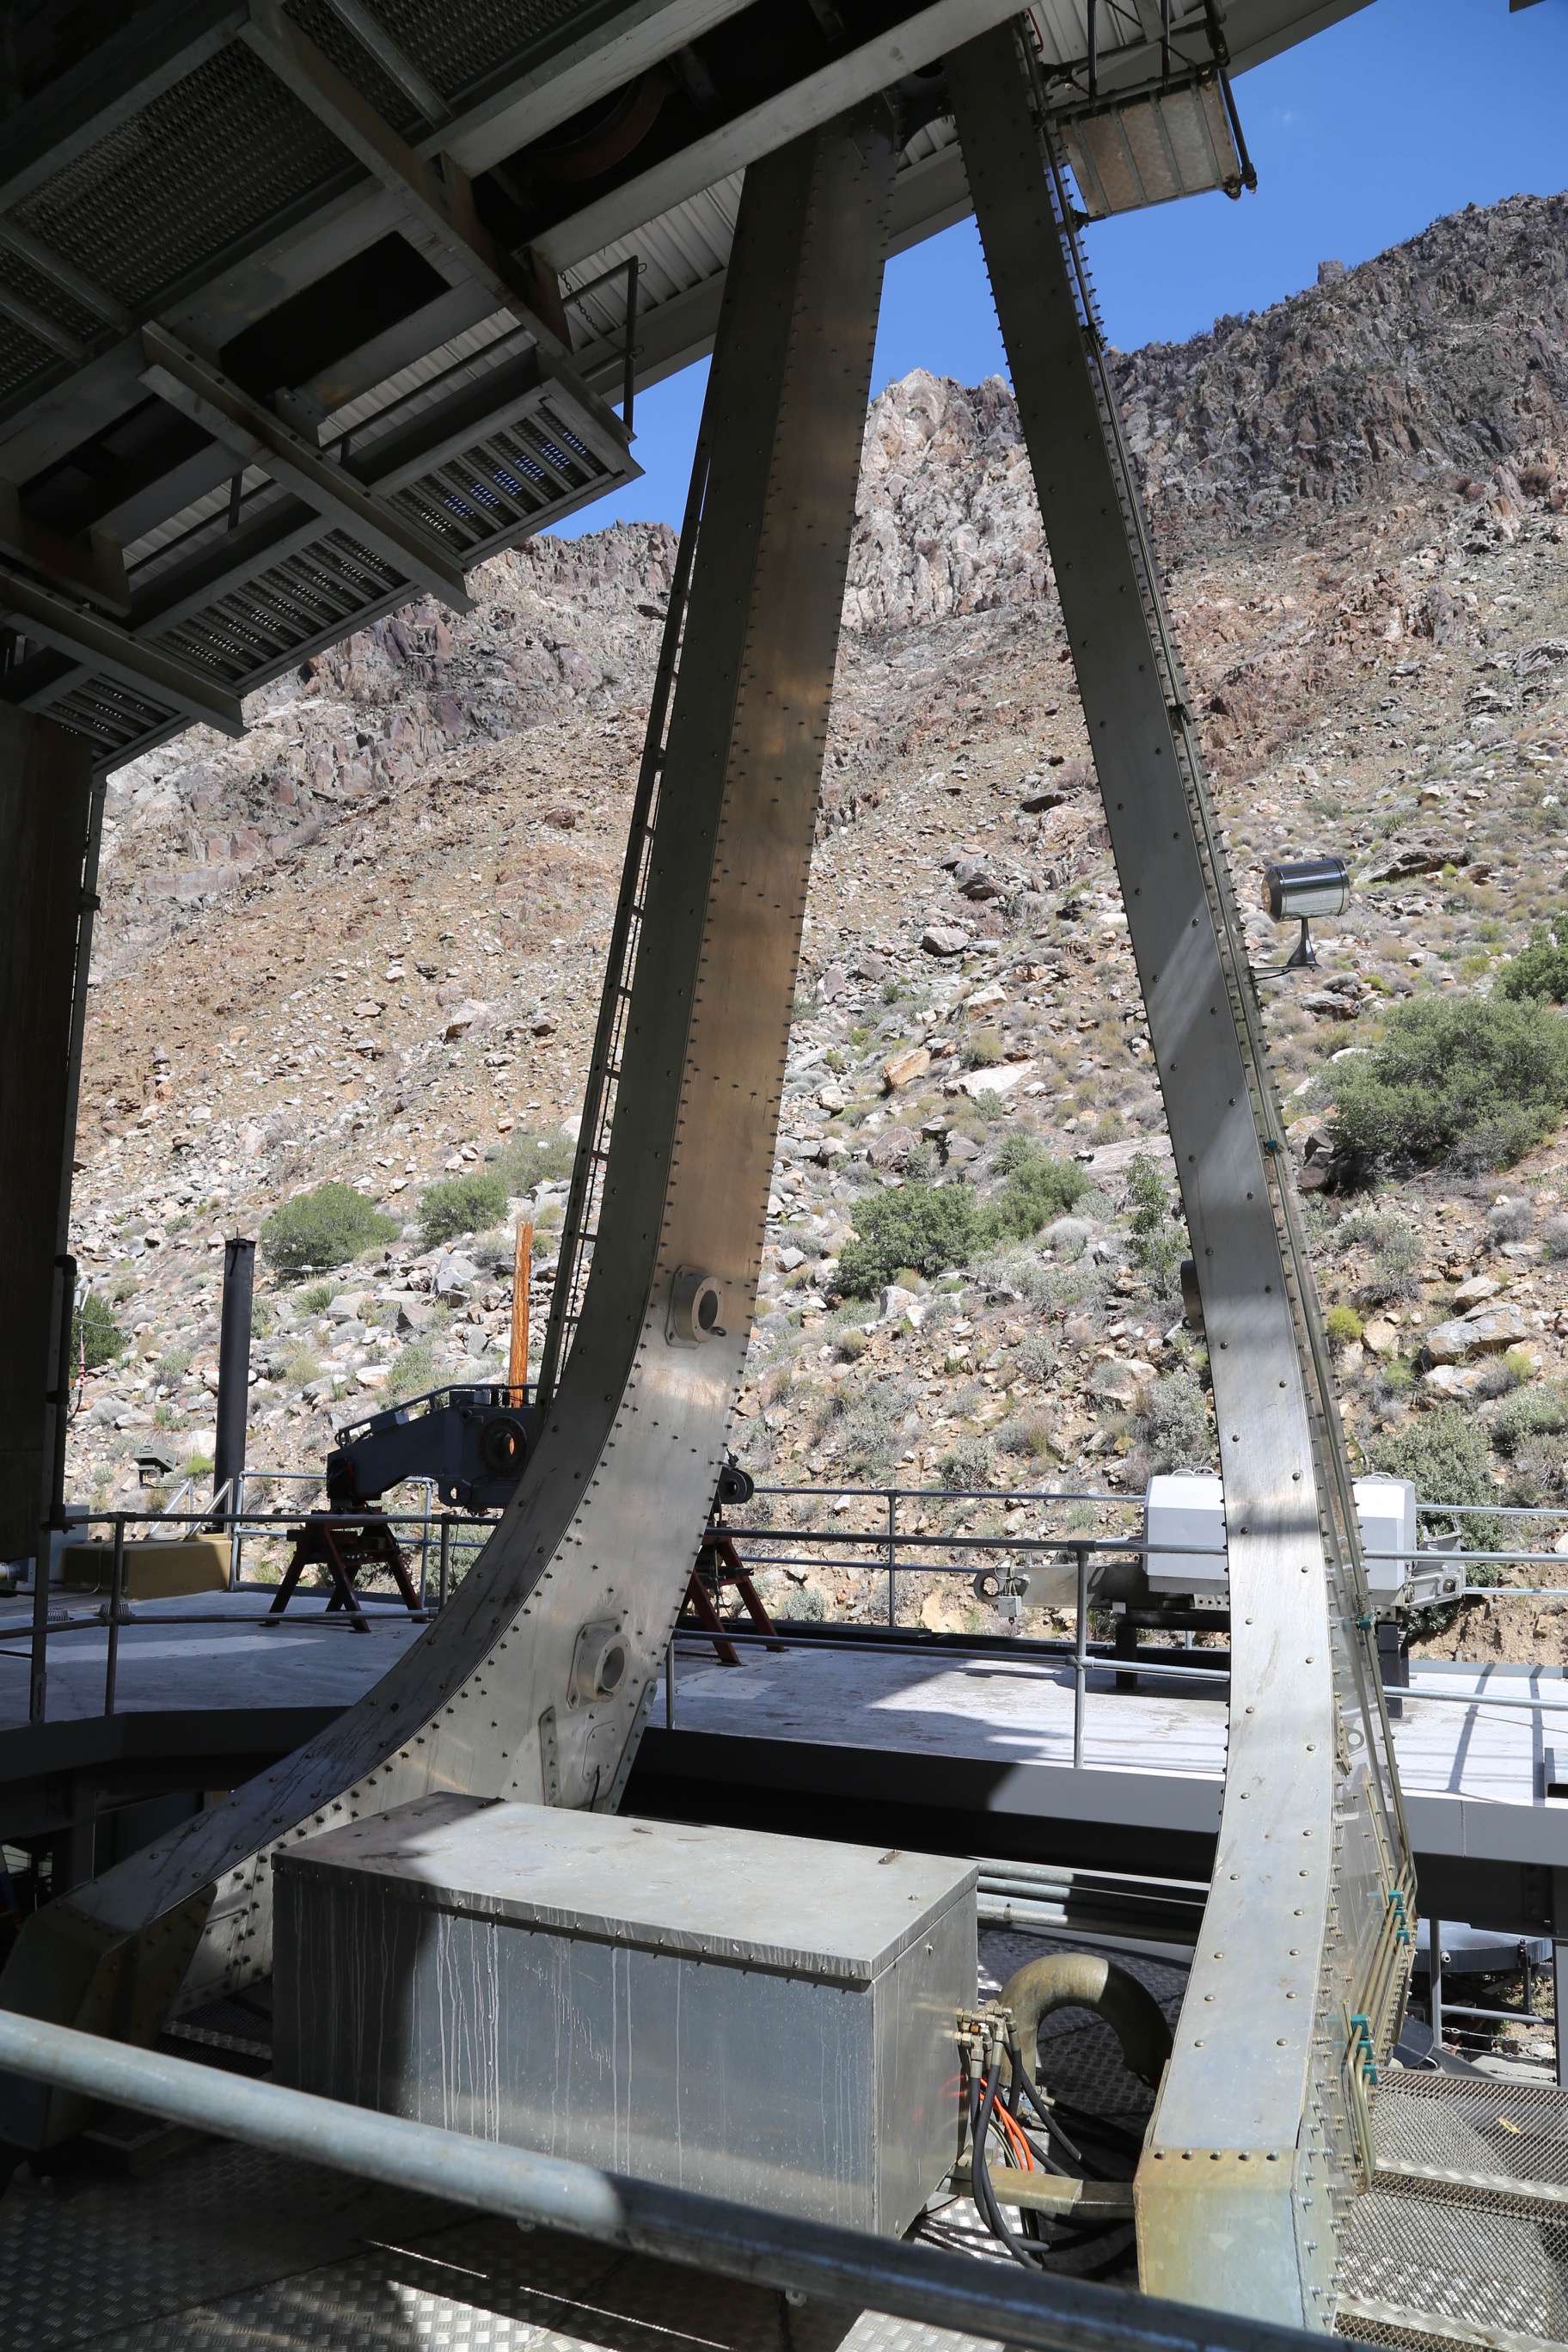 Today's modern aerial tramway cars can support tons of weight in relative safety.